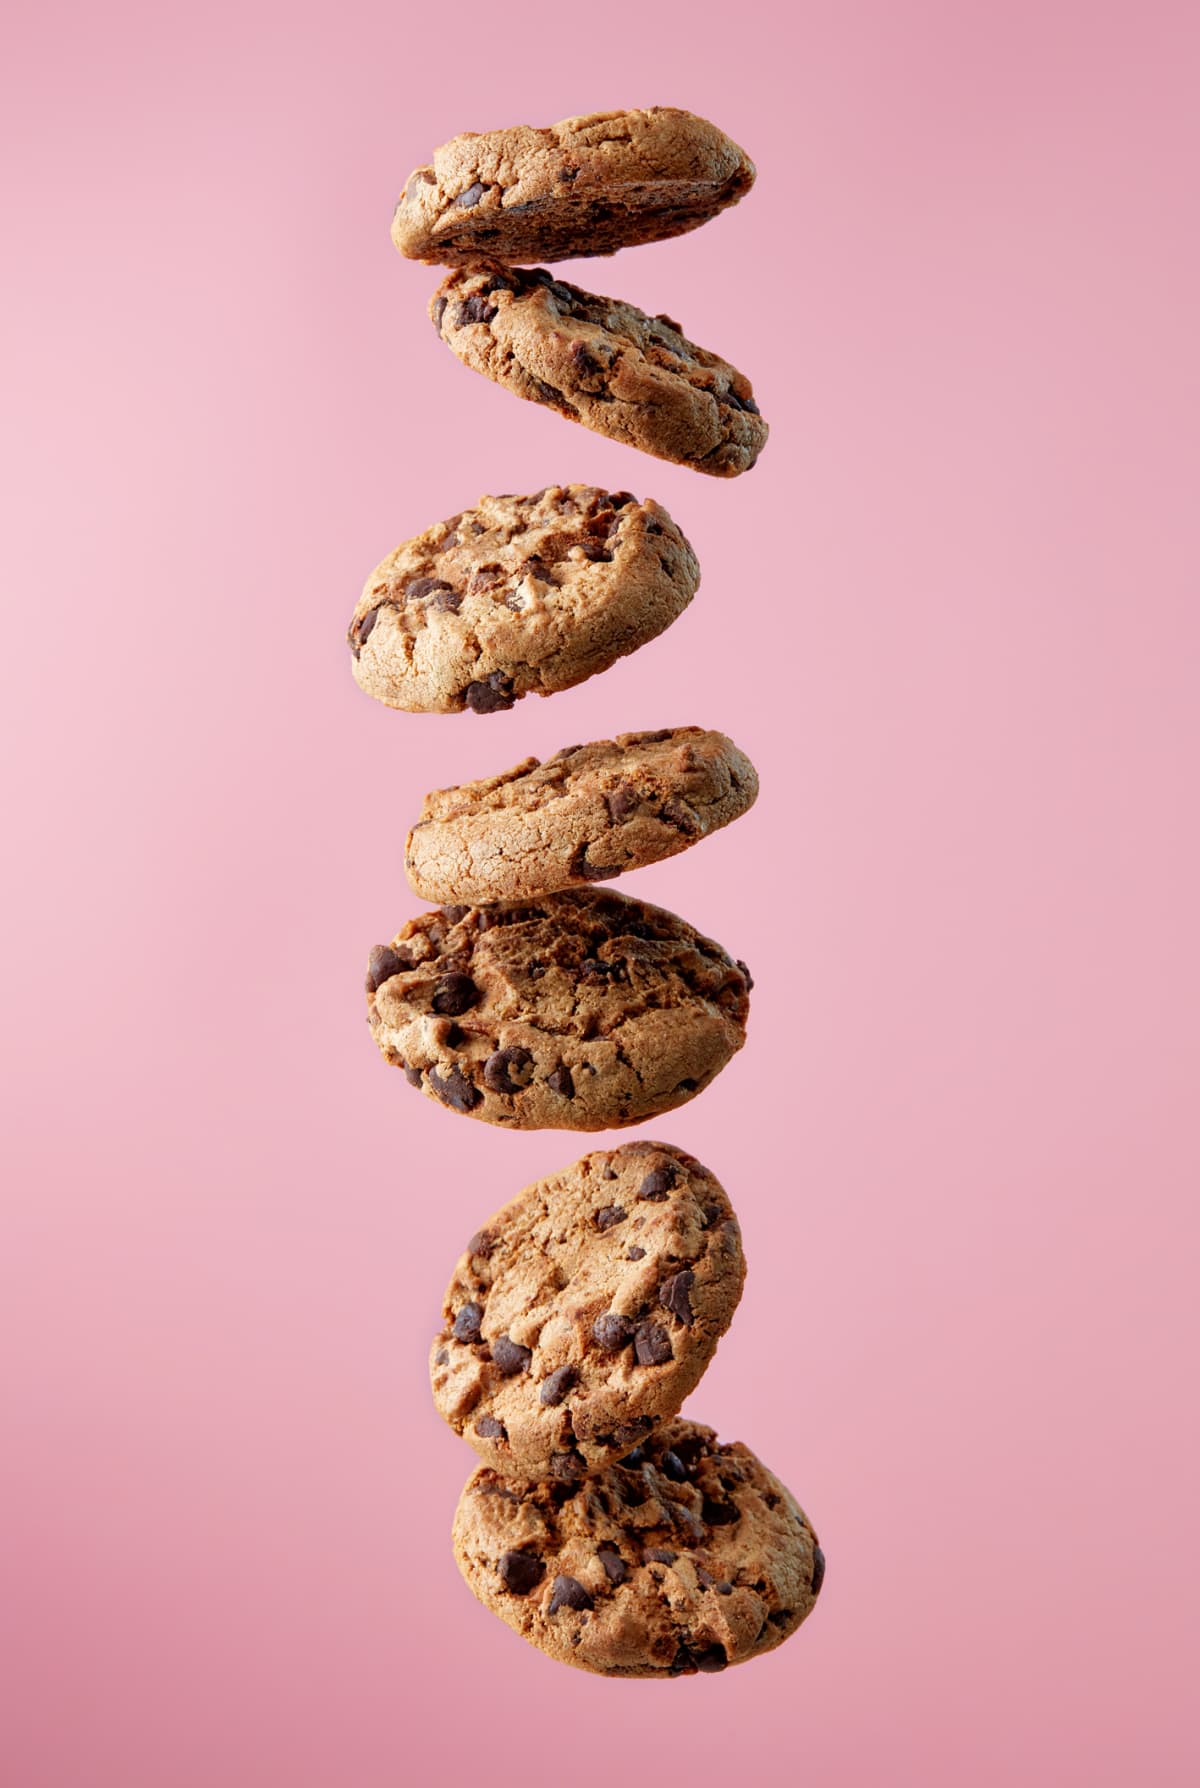 Chocolate chip cookies falling, pink background, food levitation